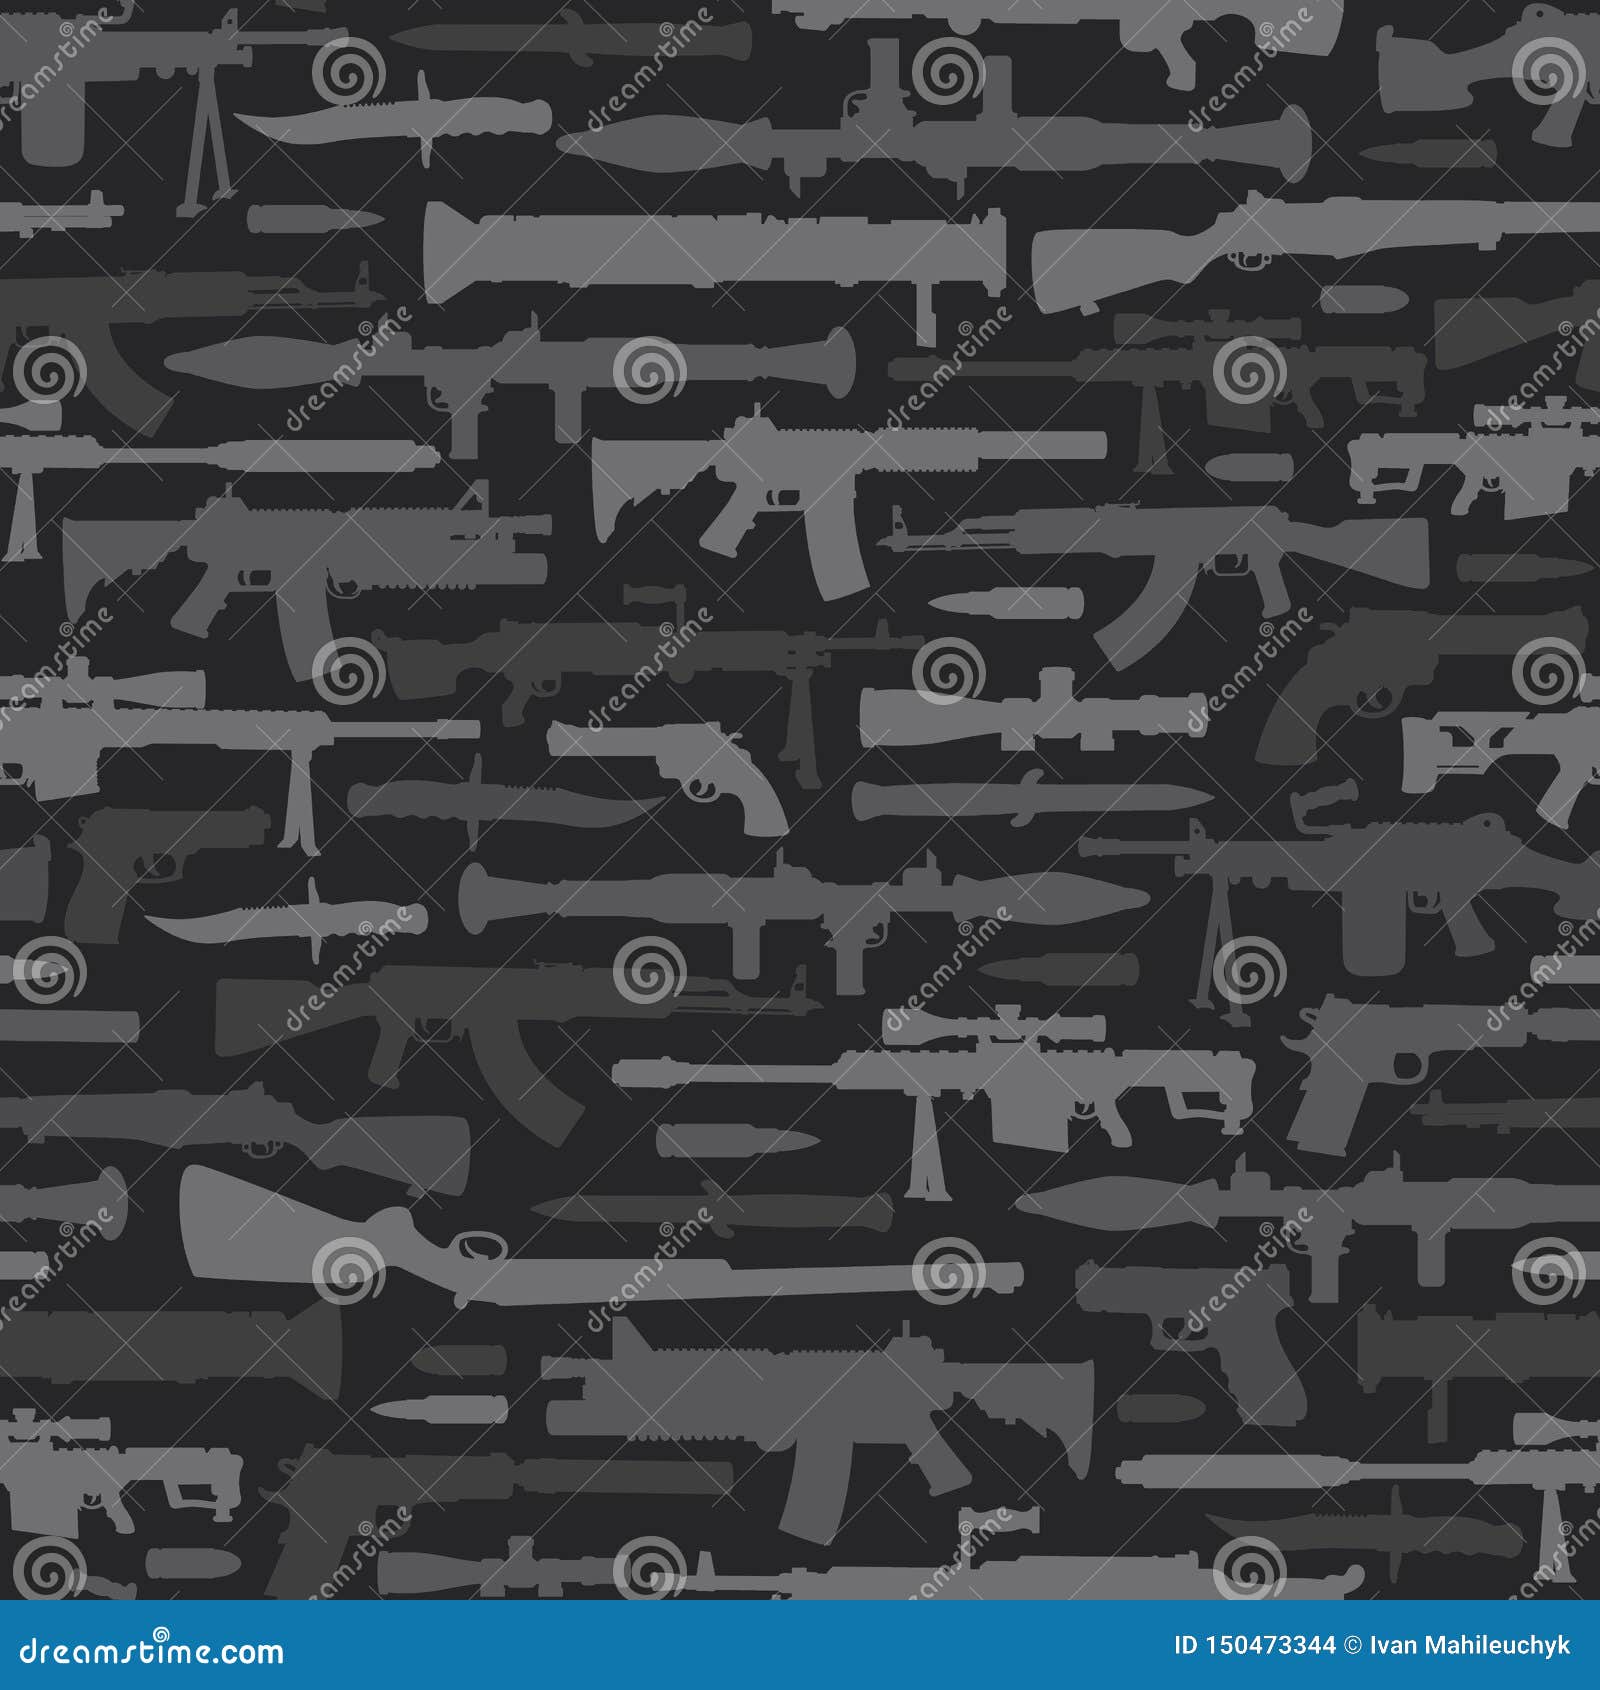 military weapons seamless pattern